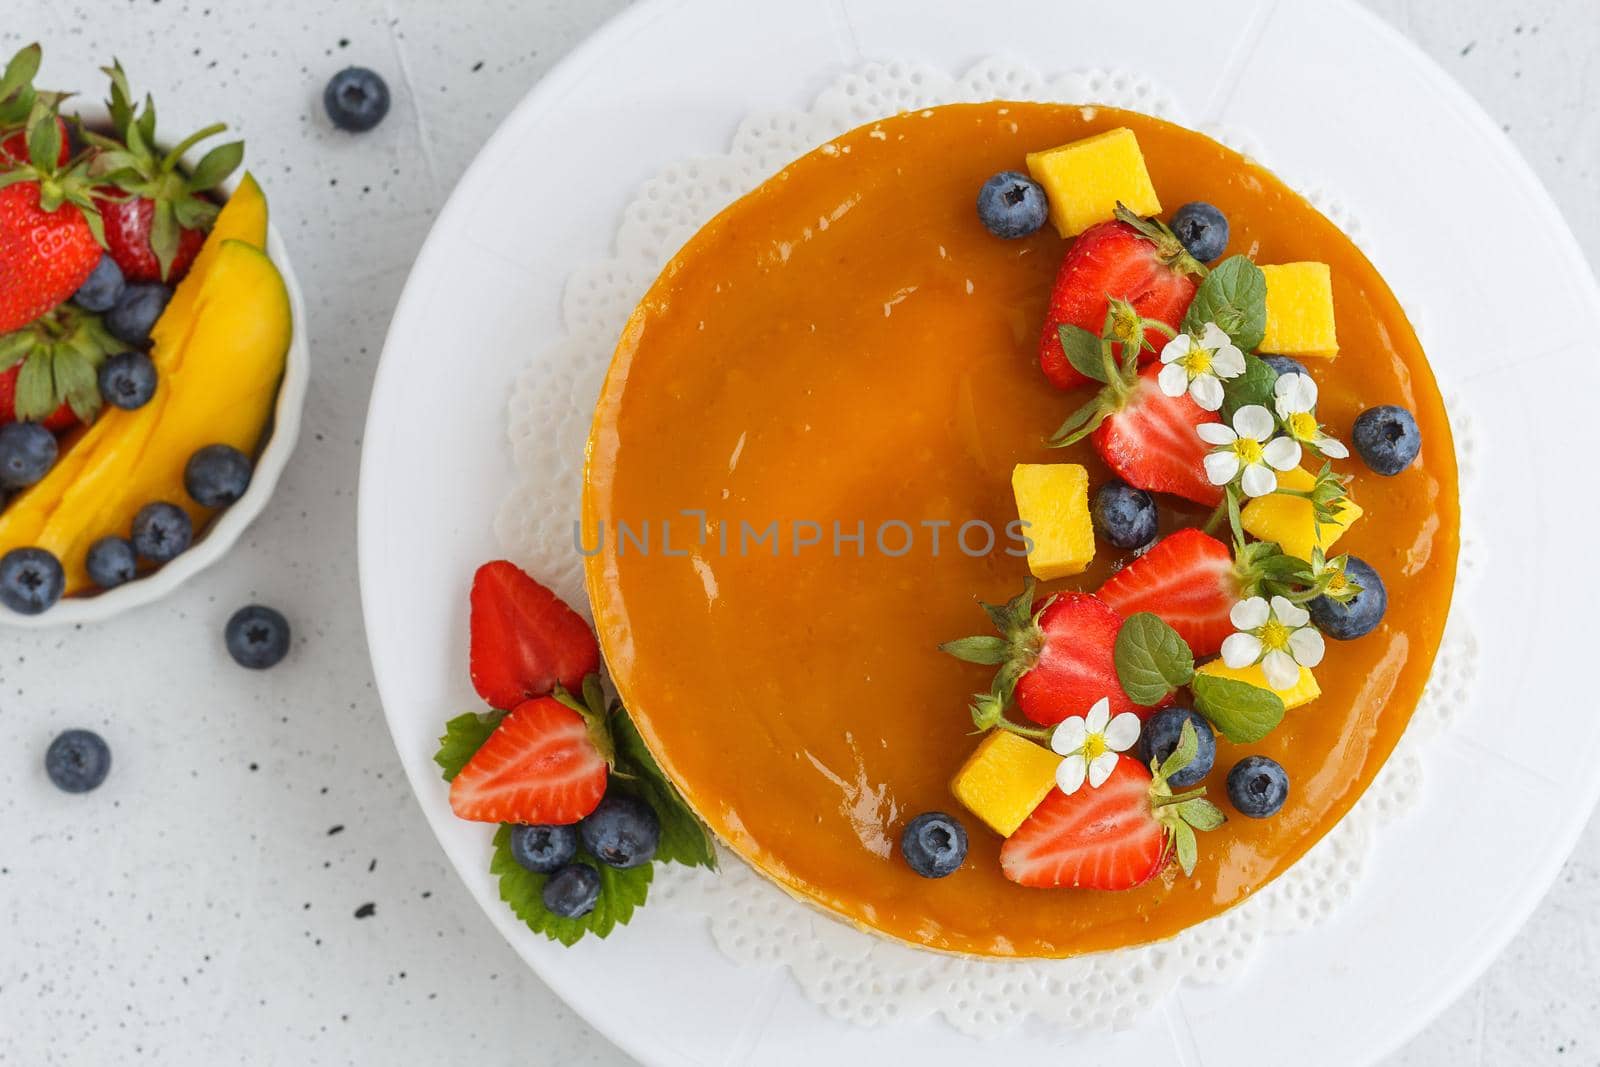 Mango cheesecake decorated with berries, mango slices and flowers on a stand. Top view